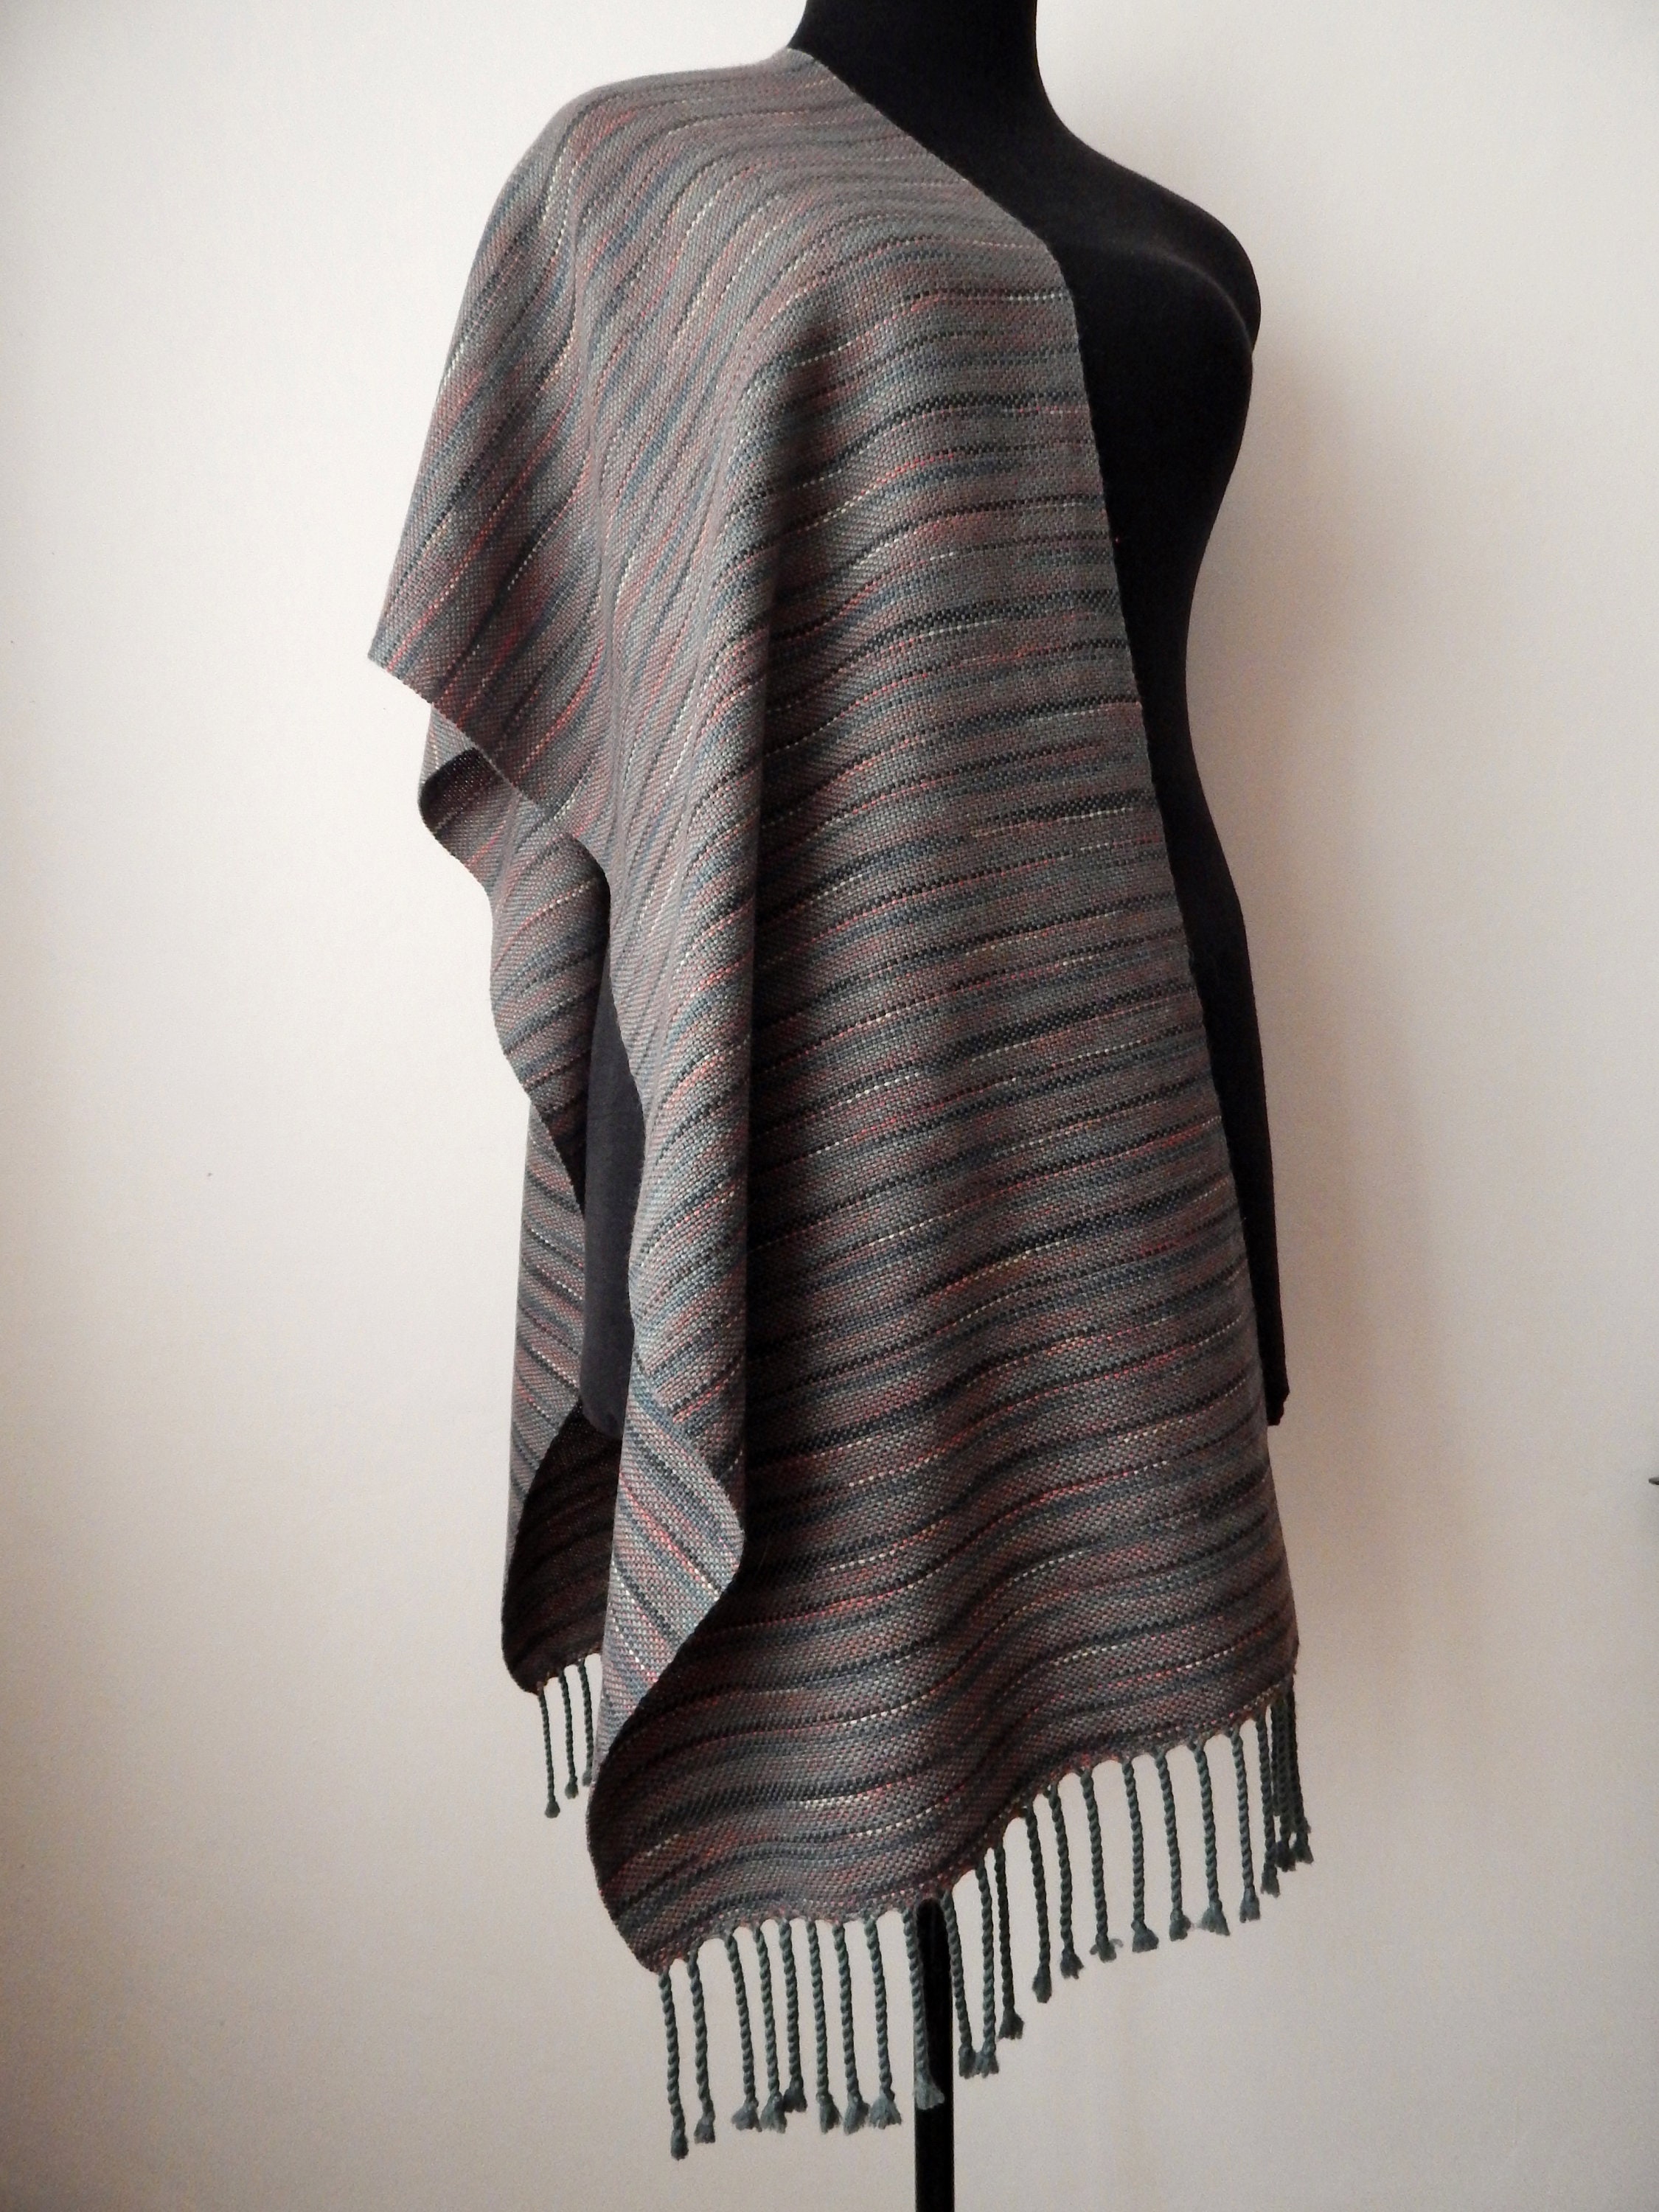 Woven grey-olive merino scarf grey striped scarf taupe wool | Etsy